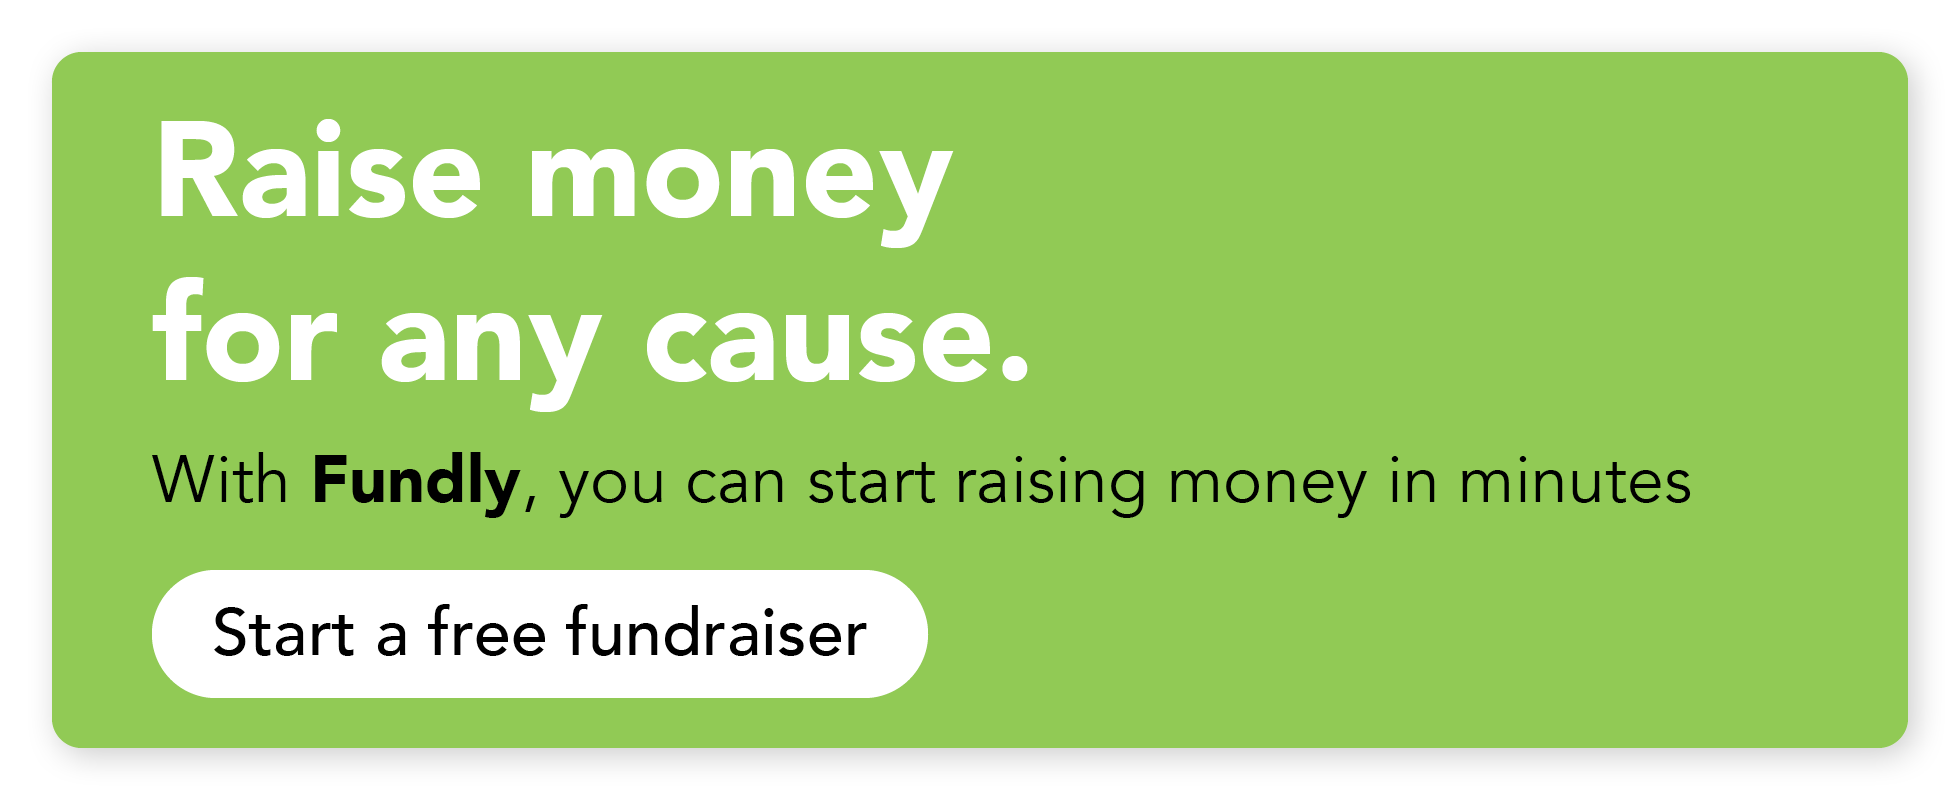 Raise money for any cause. With Fundly, you can start raising more money in minutes. Start a free fundraiser.